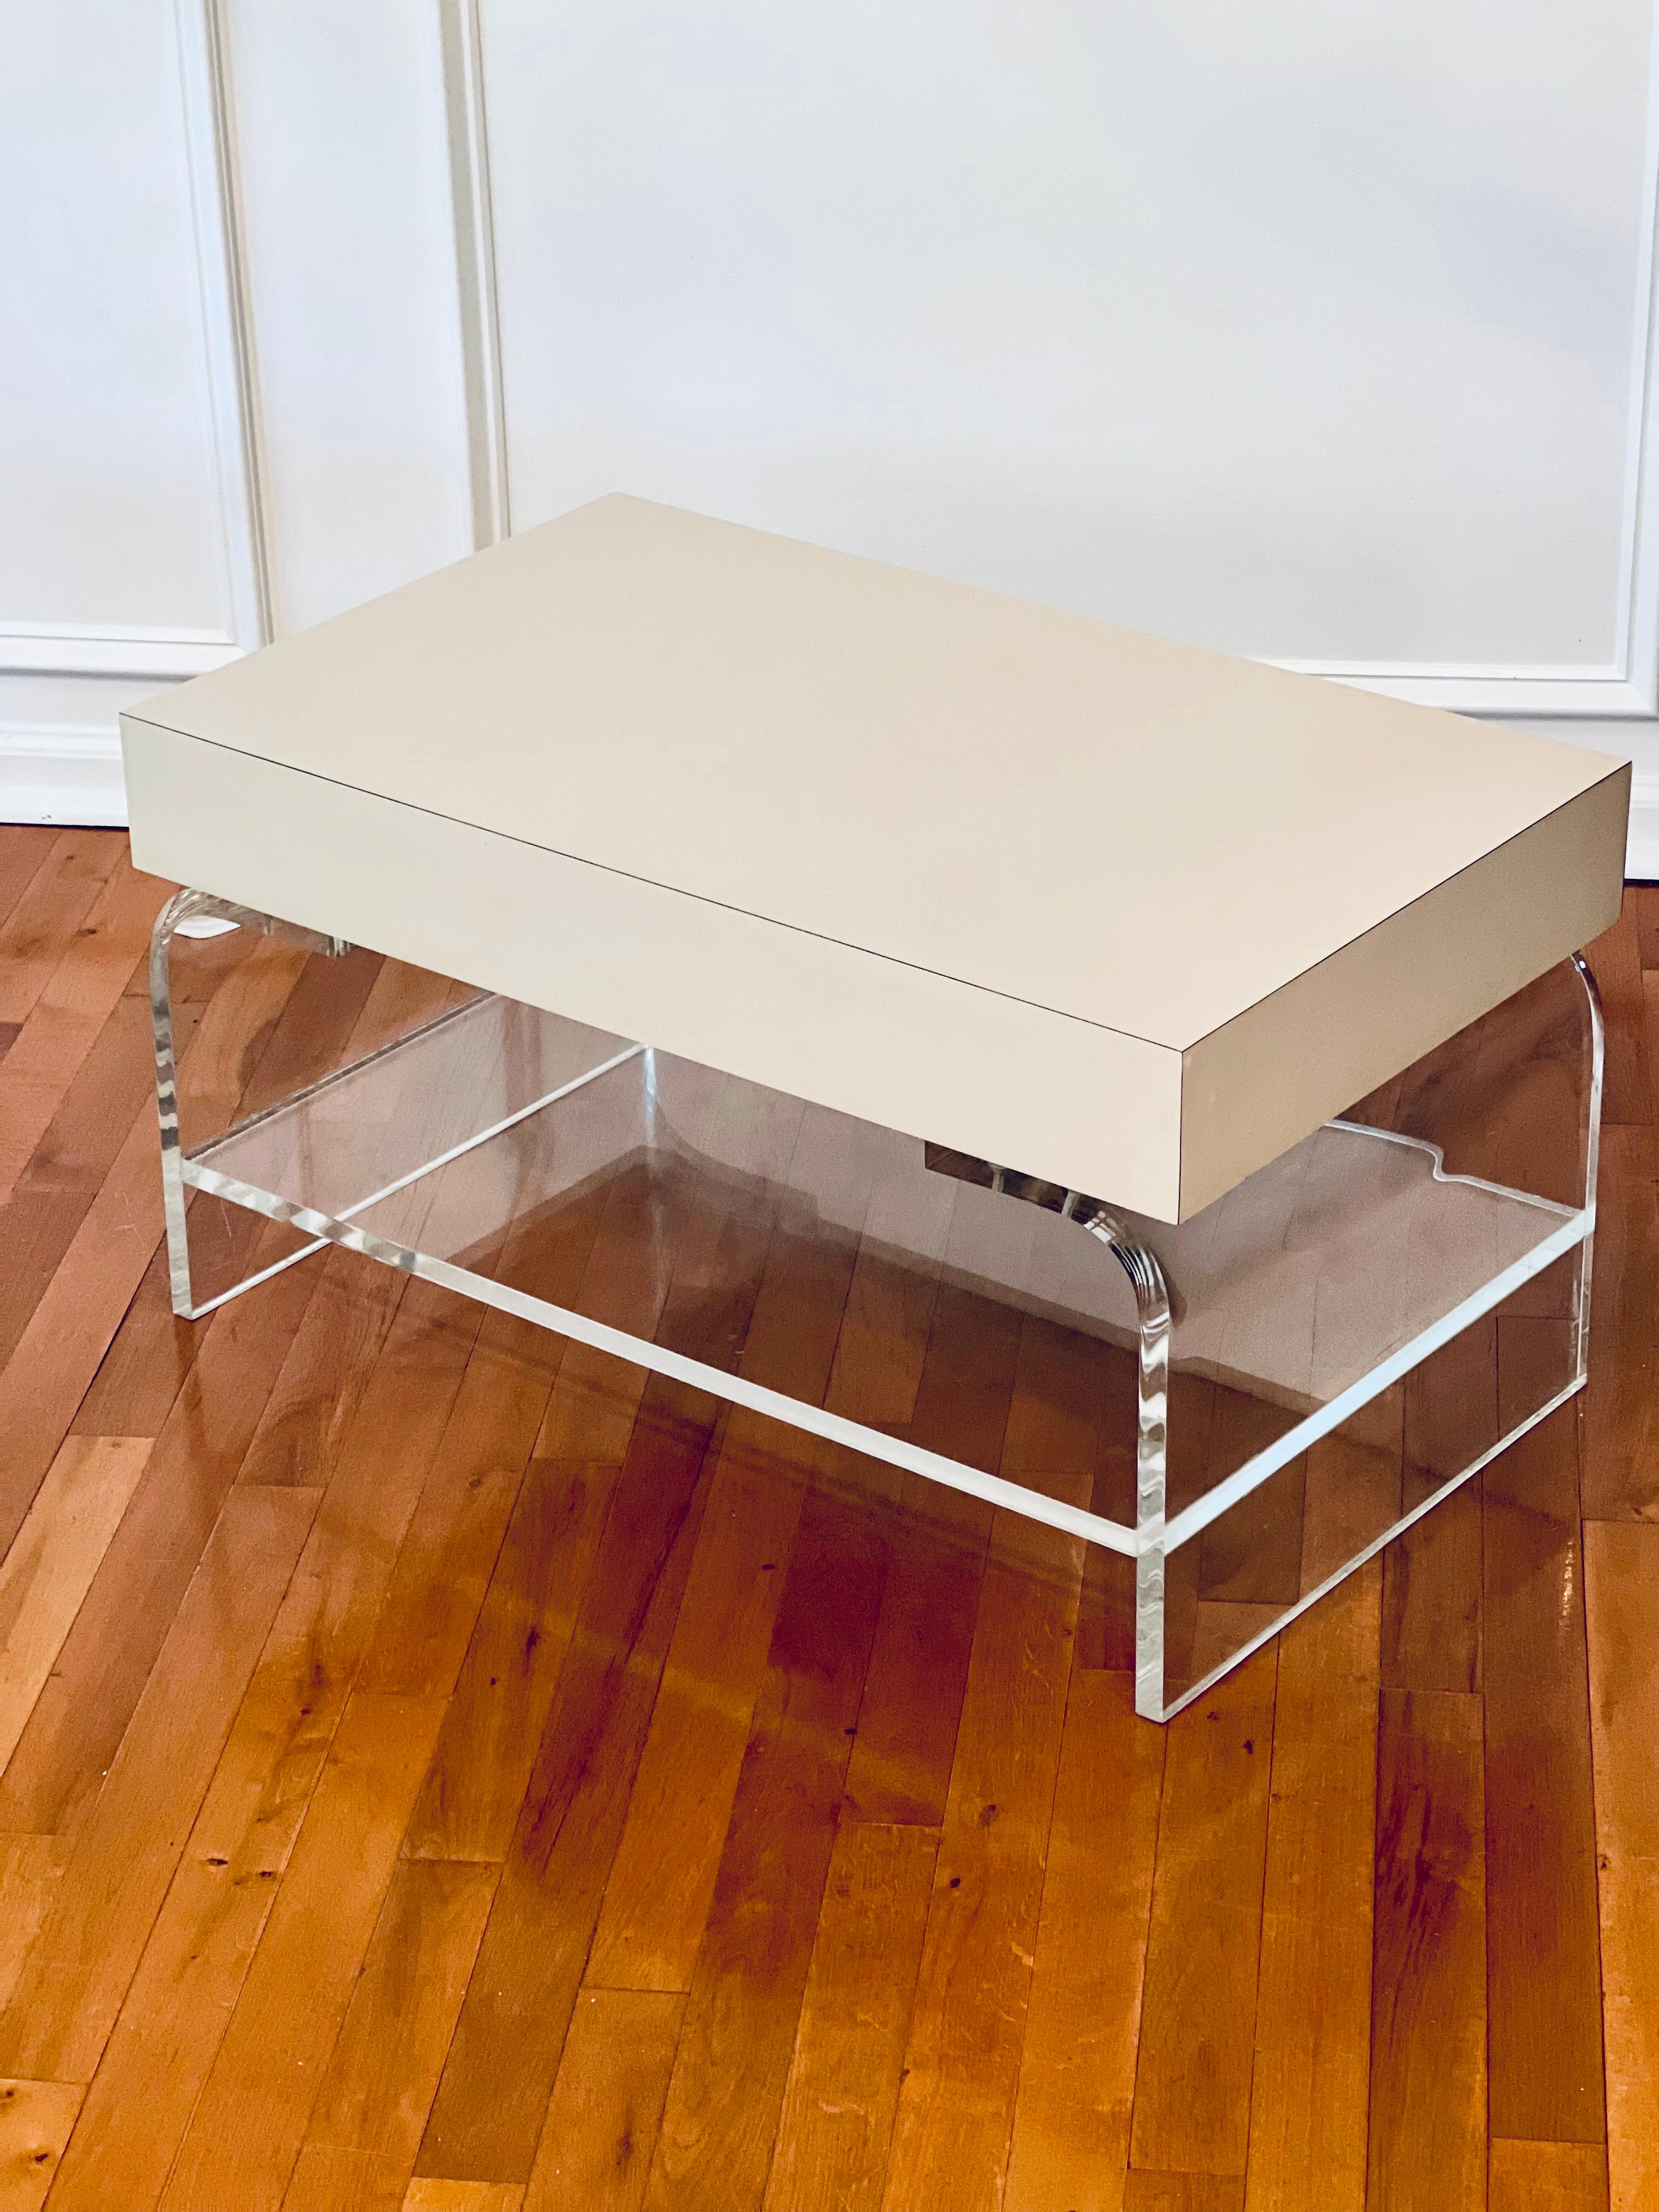 Vintage lucite waterfall coffee table with a laminate top, circa 1970-80's.

Chic little table with a high quality lucite base and lower shelf with a faux monolith slab top in a vibrant cream laminate. It may be used as a small coffee table or side